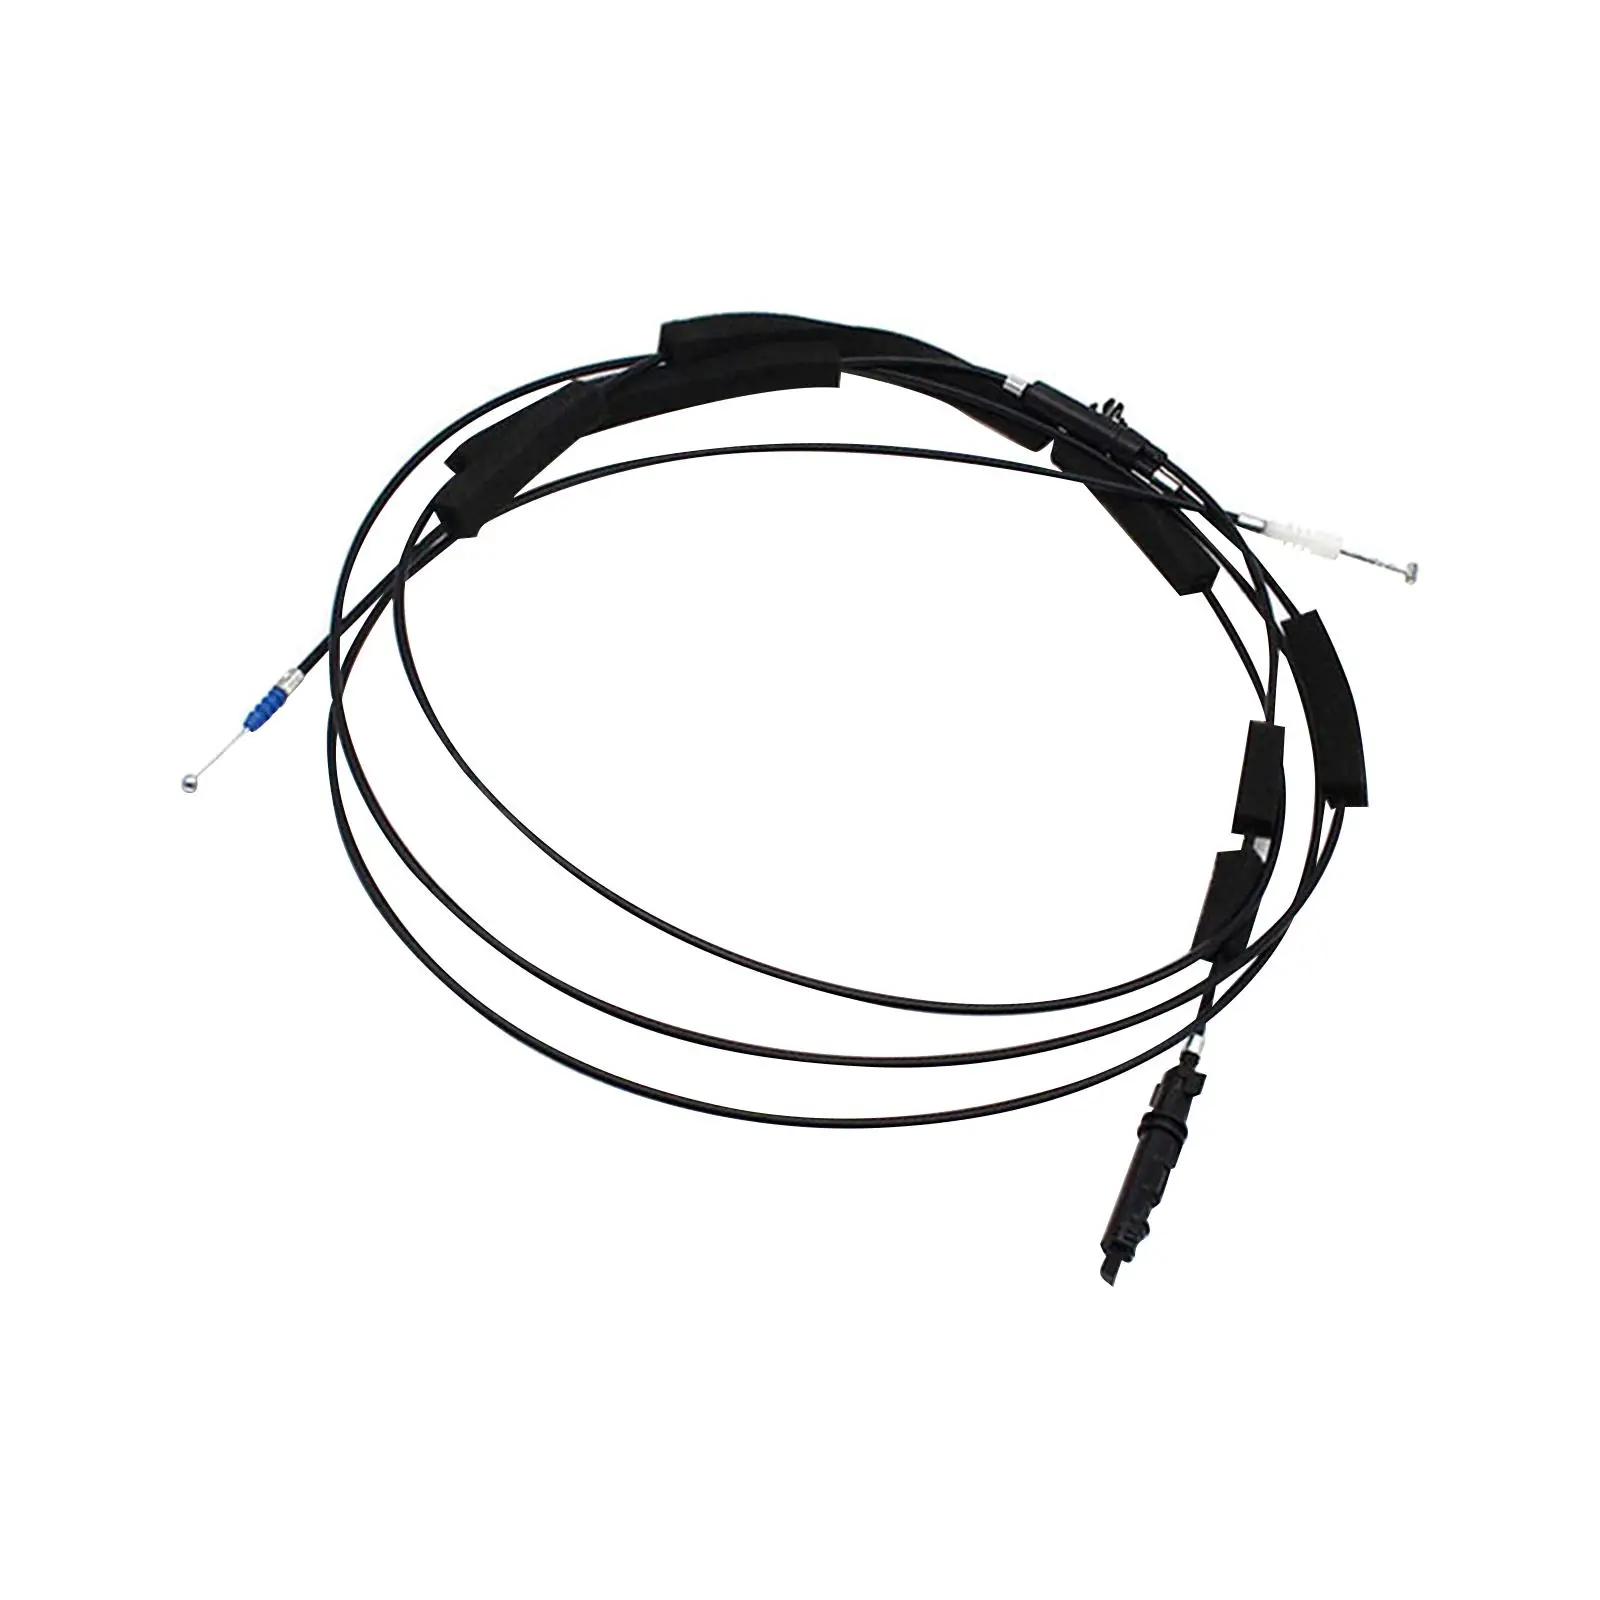 Trunk and Fuel Lid Opener Release Cable 74880-sna-a01 Assembly for Honda Civic 4 Door Sedan Automobile Repairing Accessory